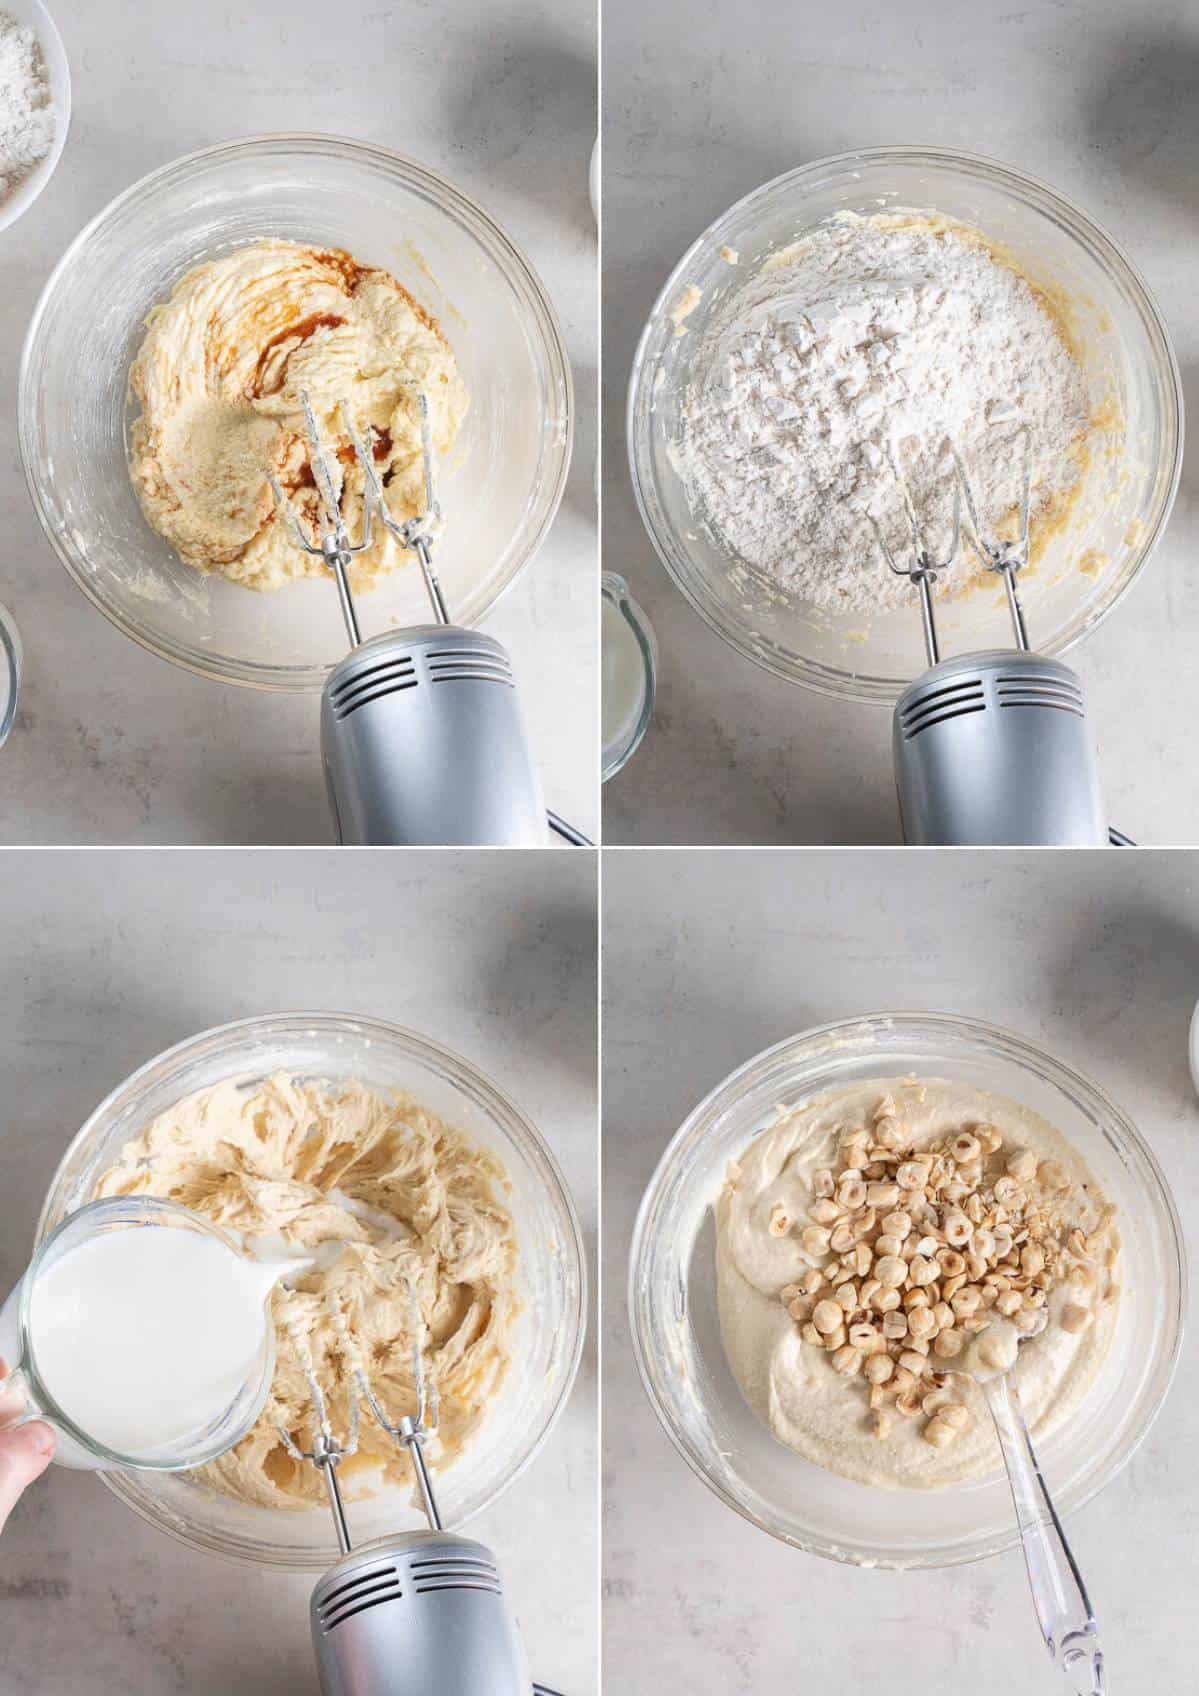 instructional photos for making nutella bread